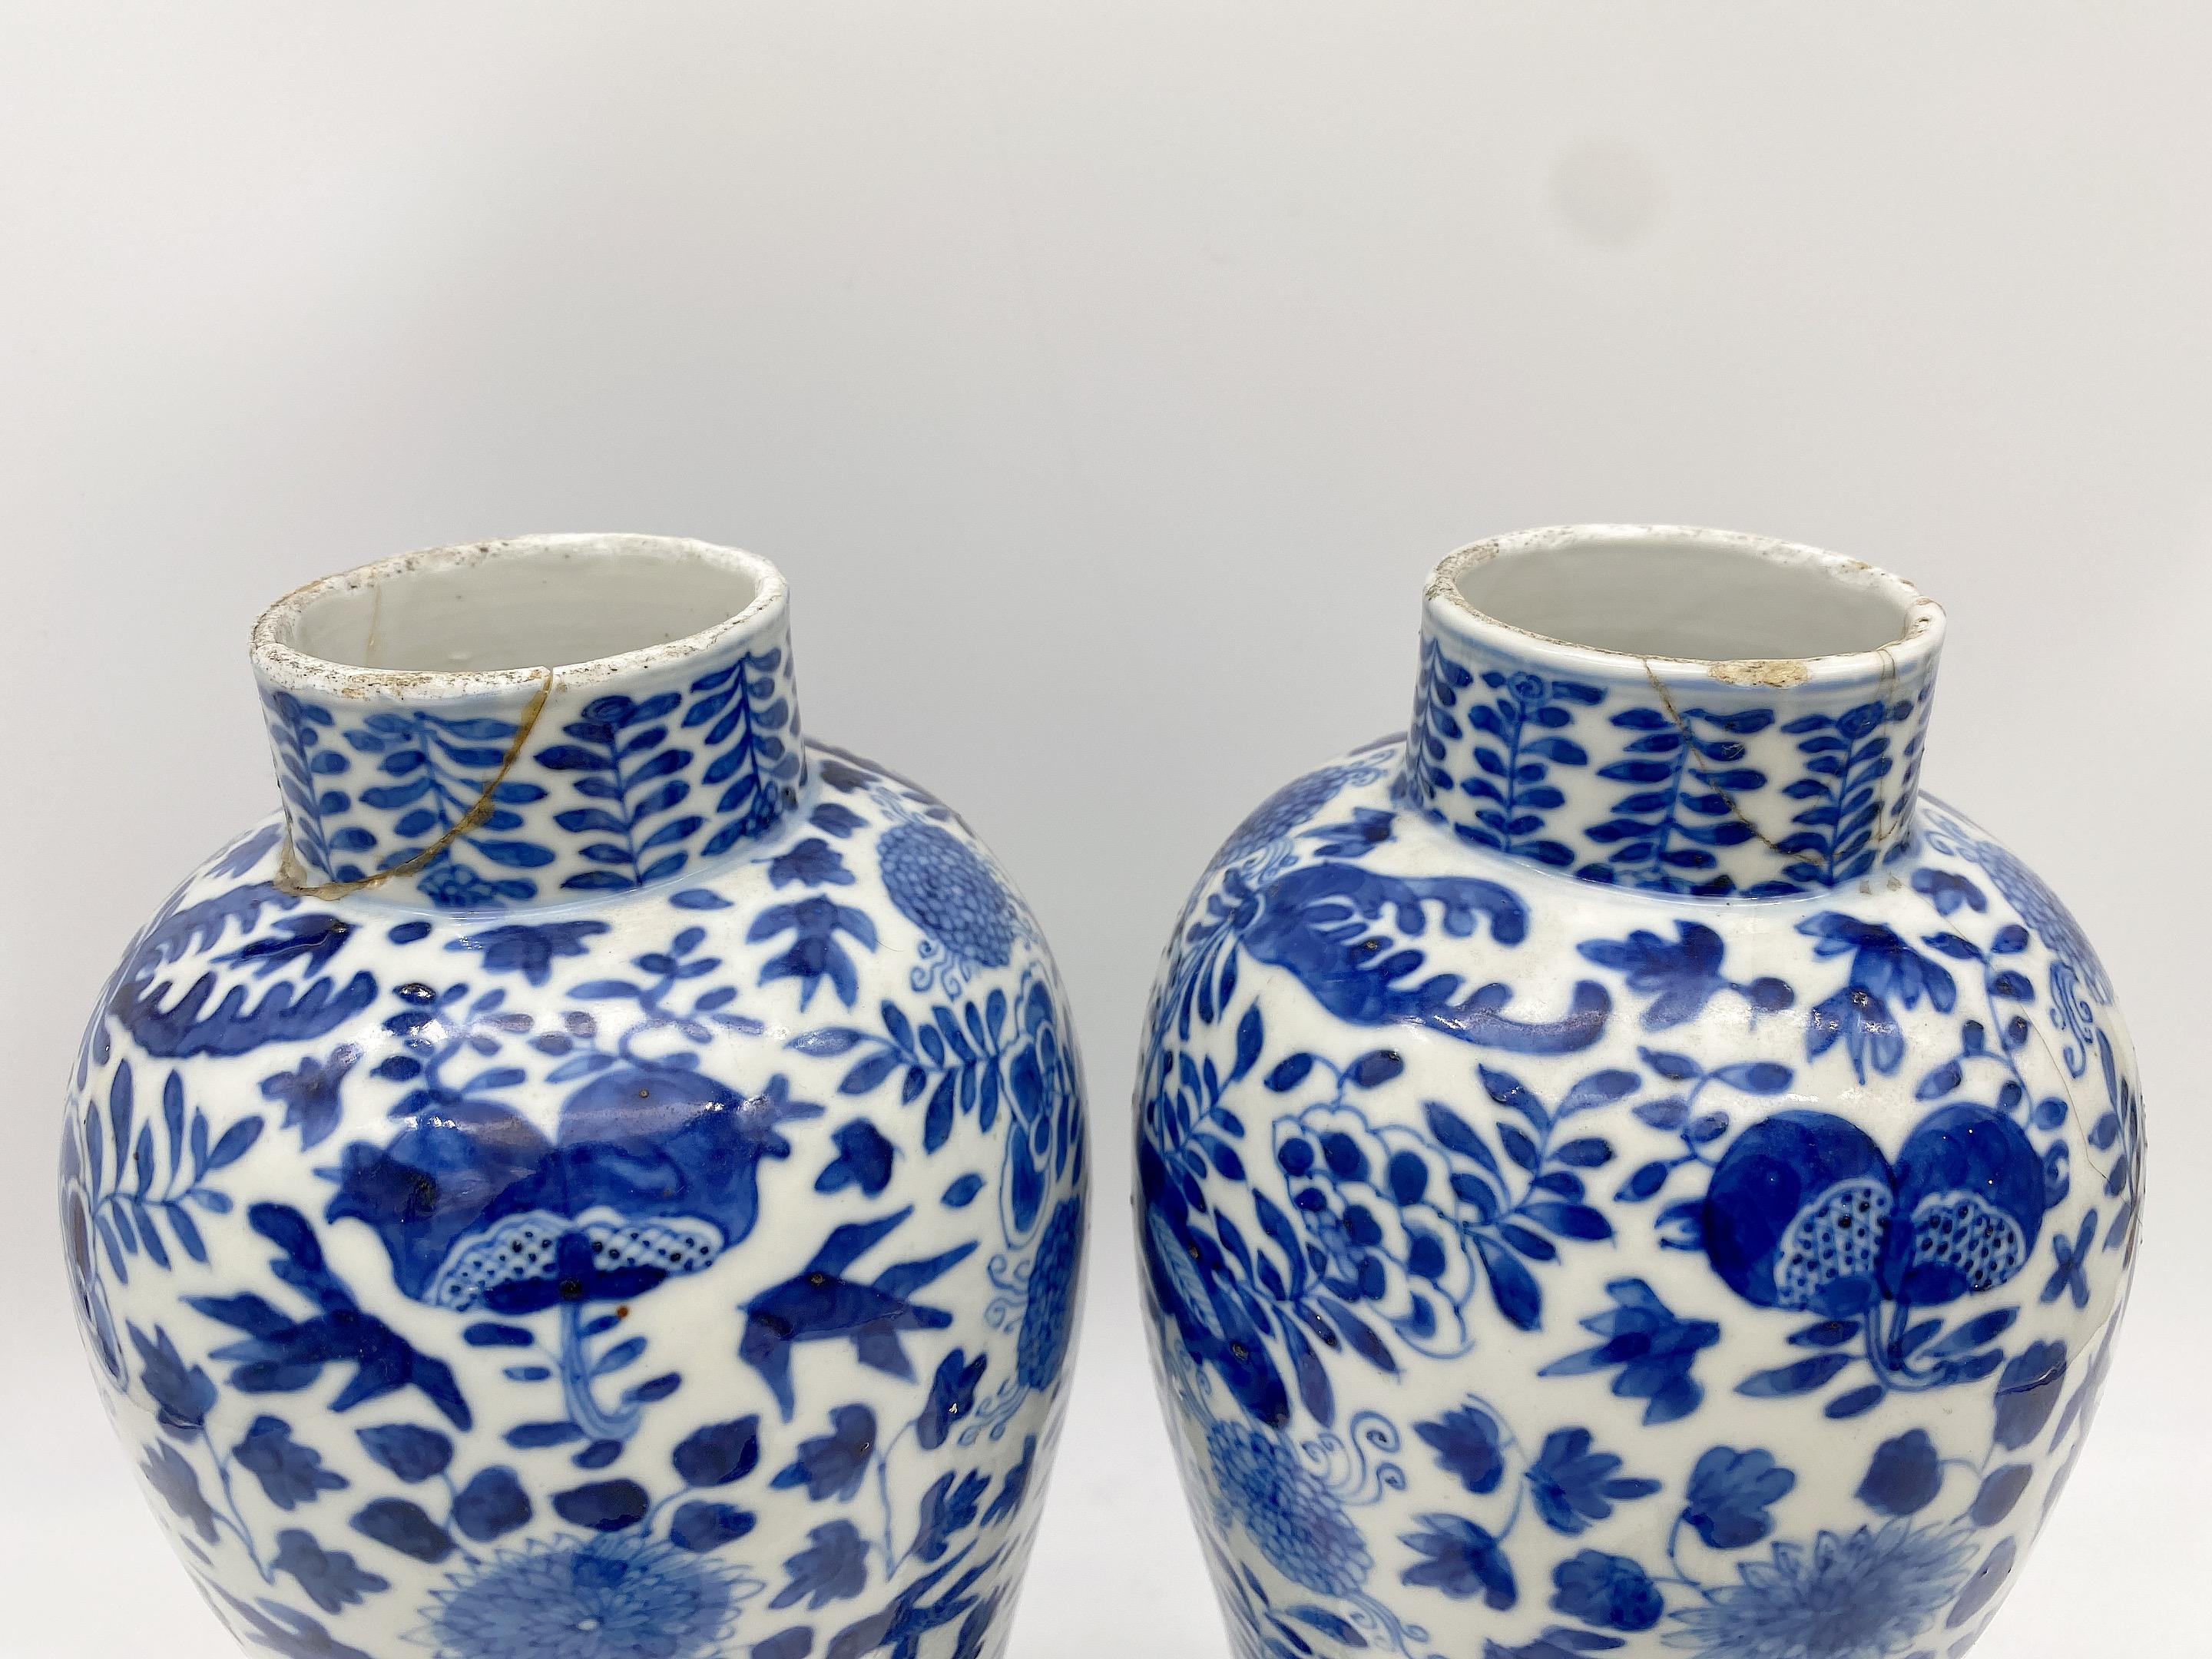 18th Century Antique Pair of Chinese Blue and White Porcelain Jars and Covers For Sale 5